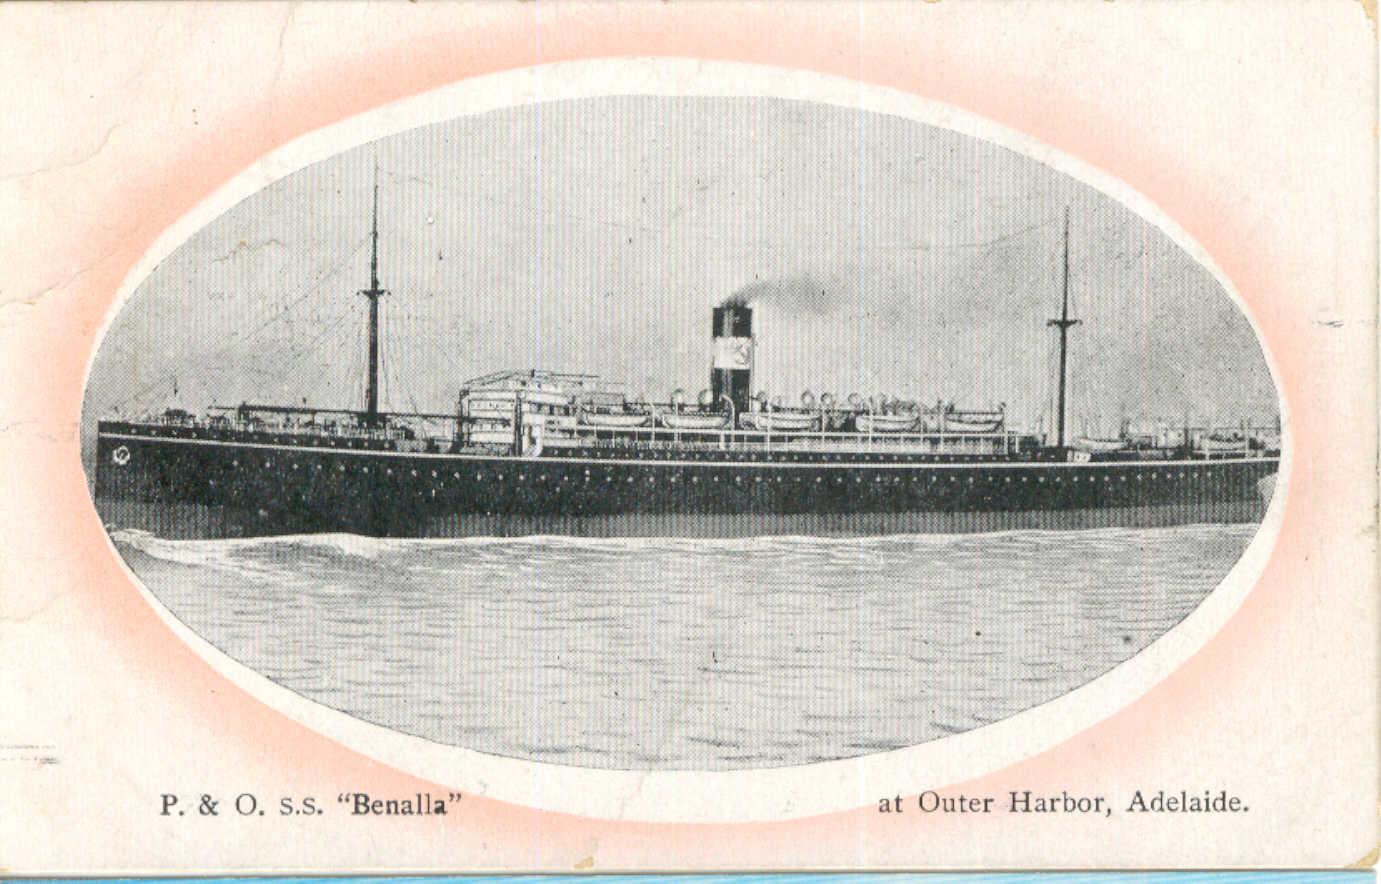 Passenger Vessel "Benalla", built in 1912 by Caird & Co - Greenock and launched on 27 October 1912.  Vessel took her inaugural voyage in March 1913 from London to Sydney.
Base Port:  London
Tonnage:  11118 gross
Dimensions:  length 515', breadth63', dr